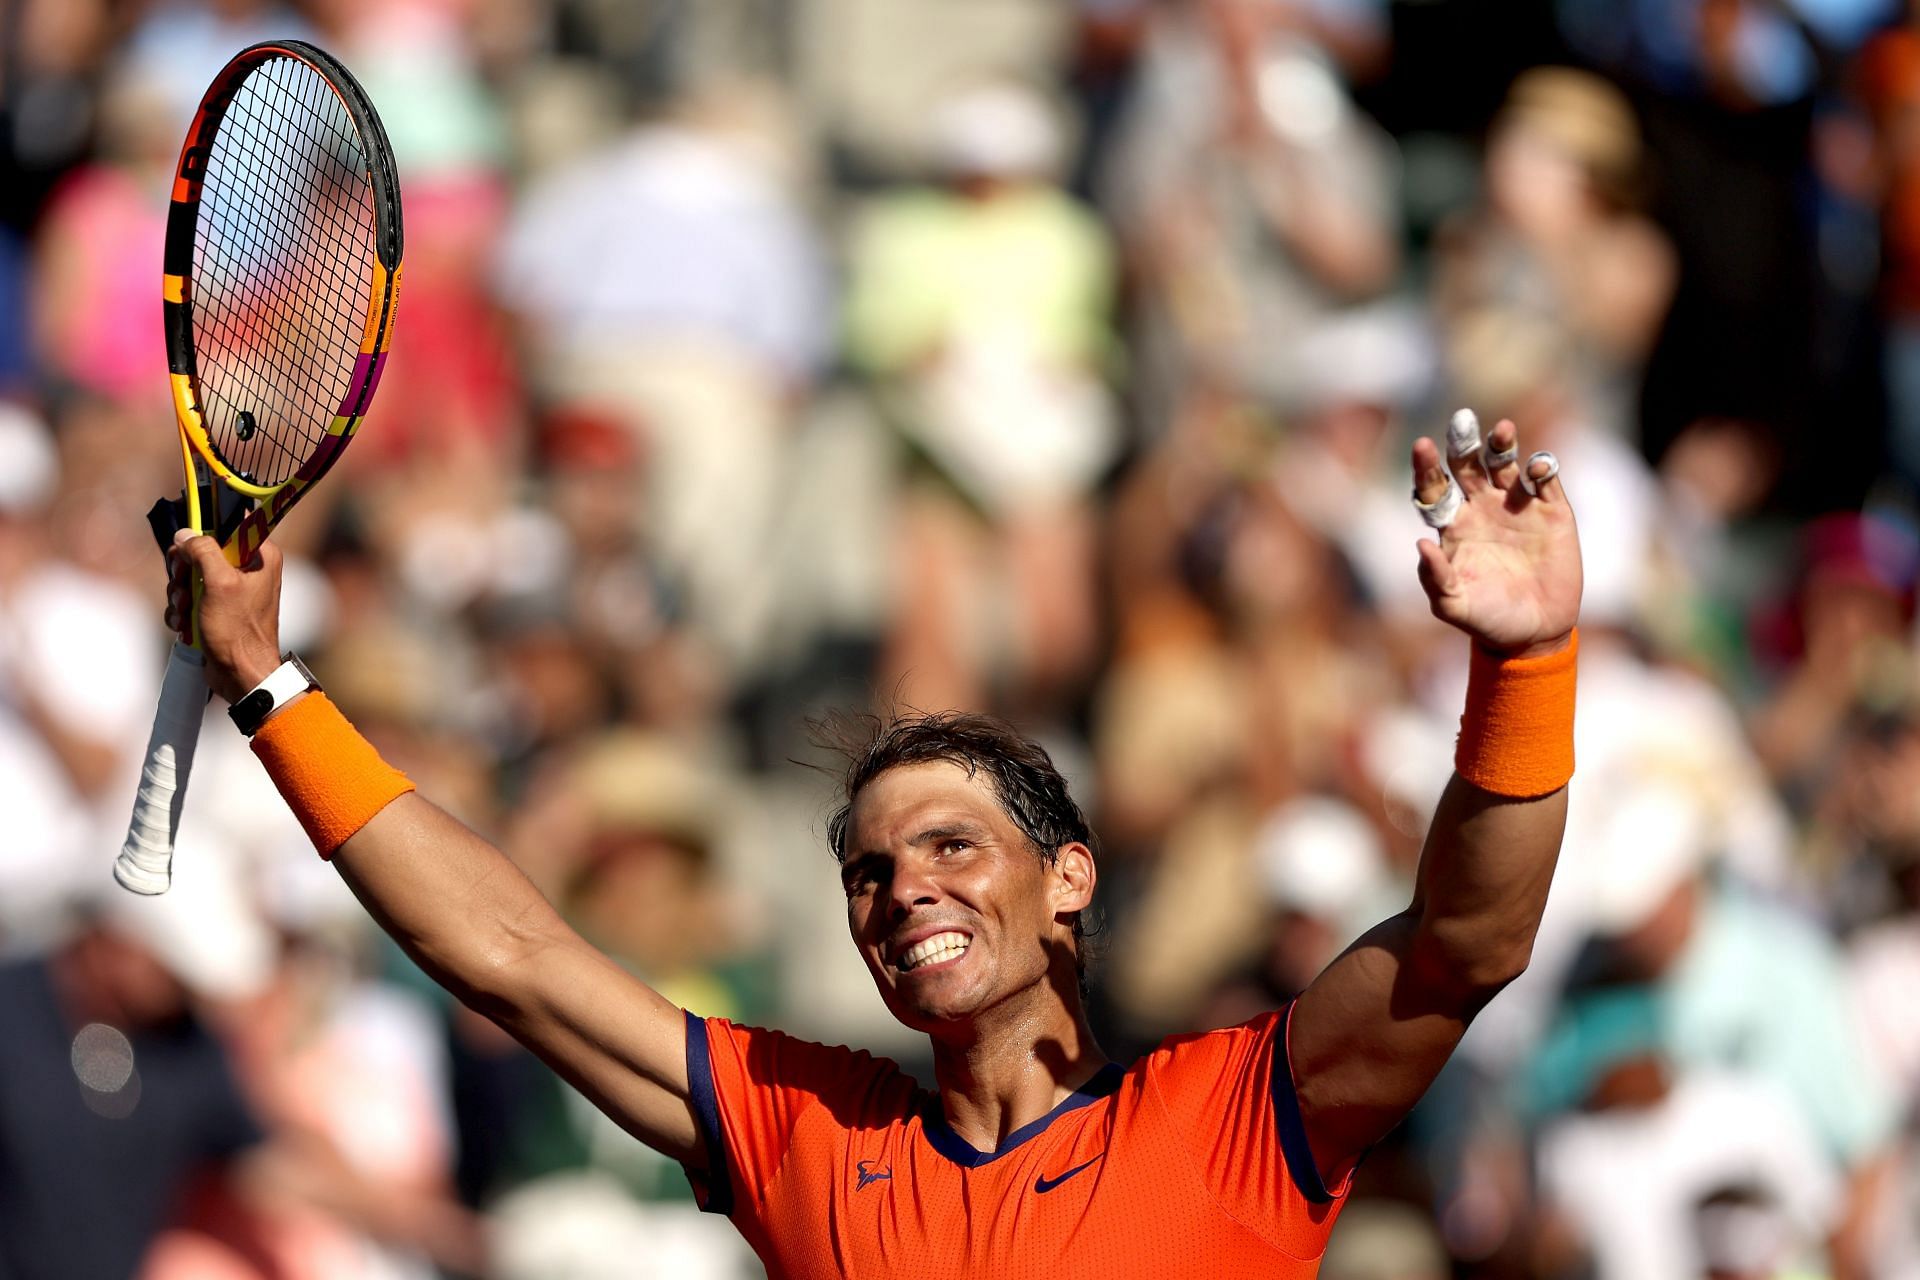 Rafael Nadal celebrates his win over Reilly Opelka at the Indian Wells Masters